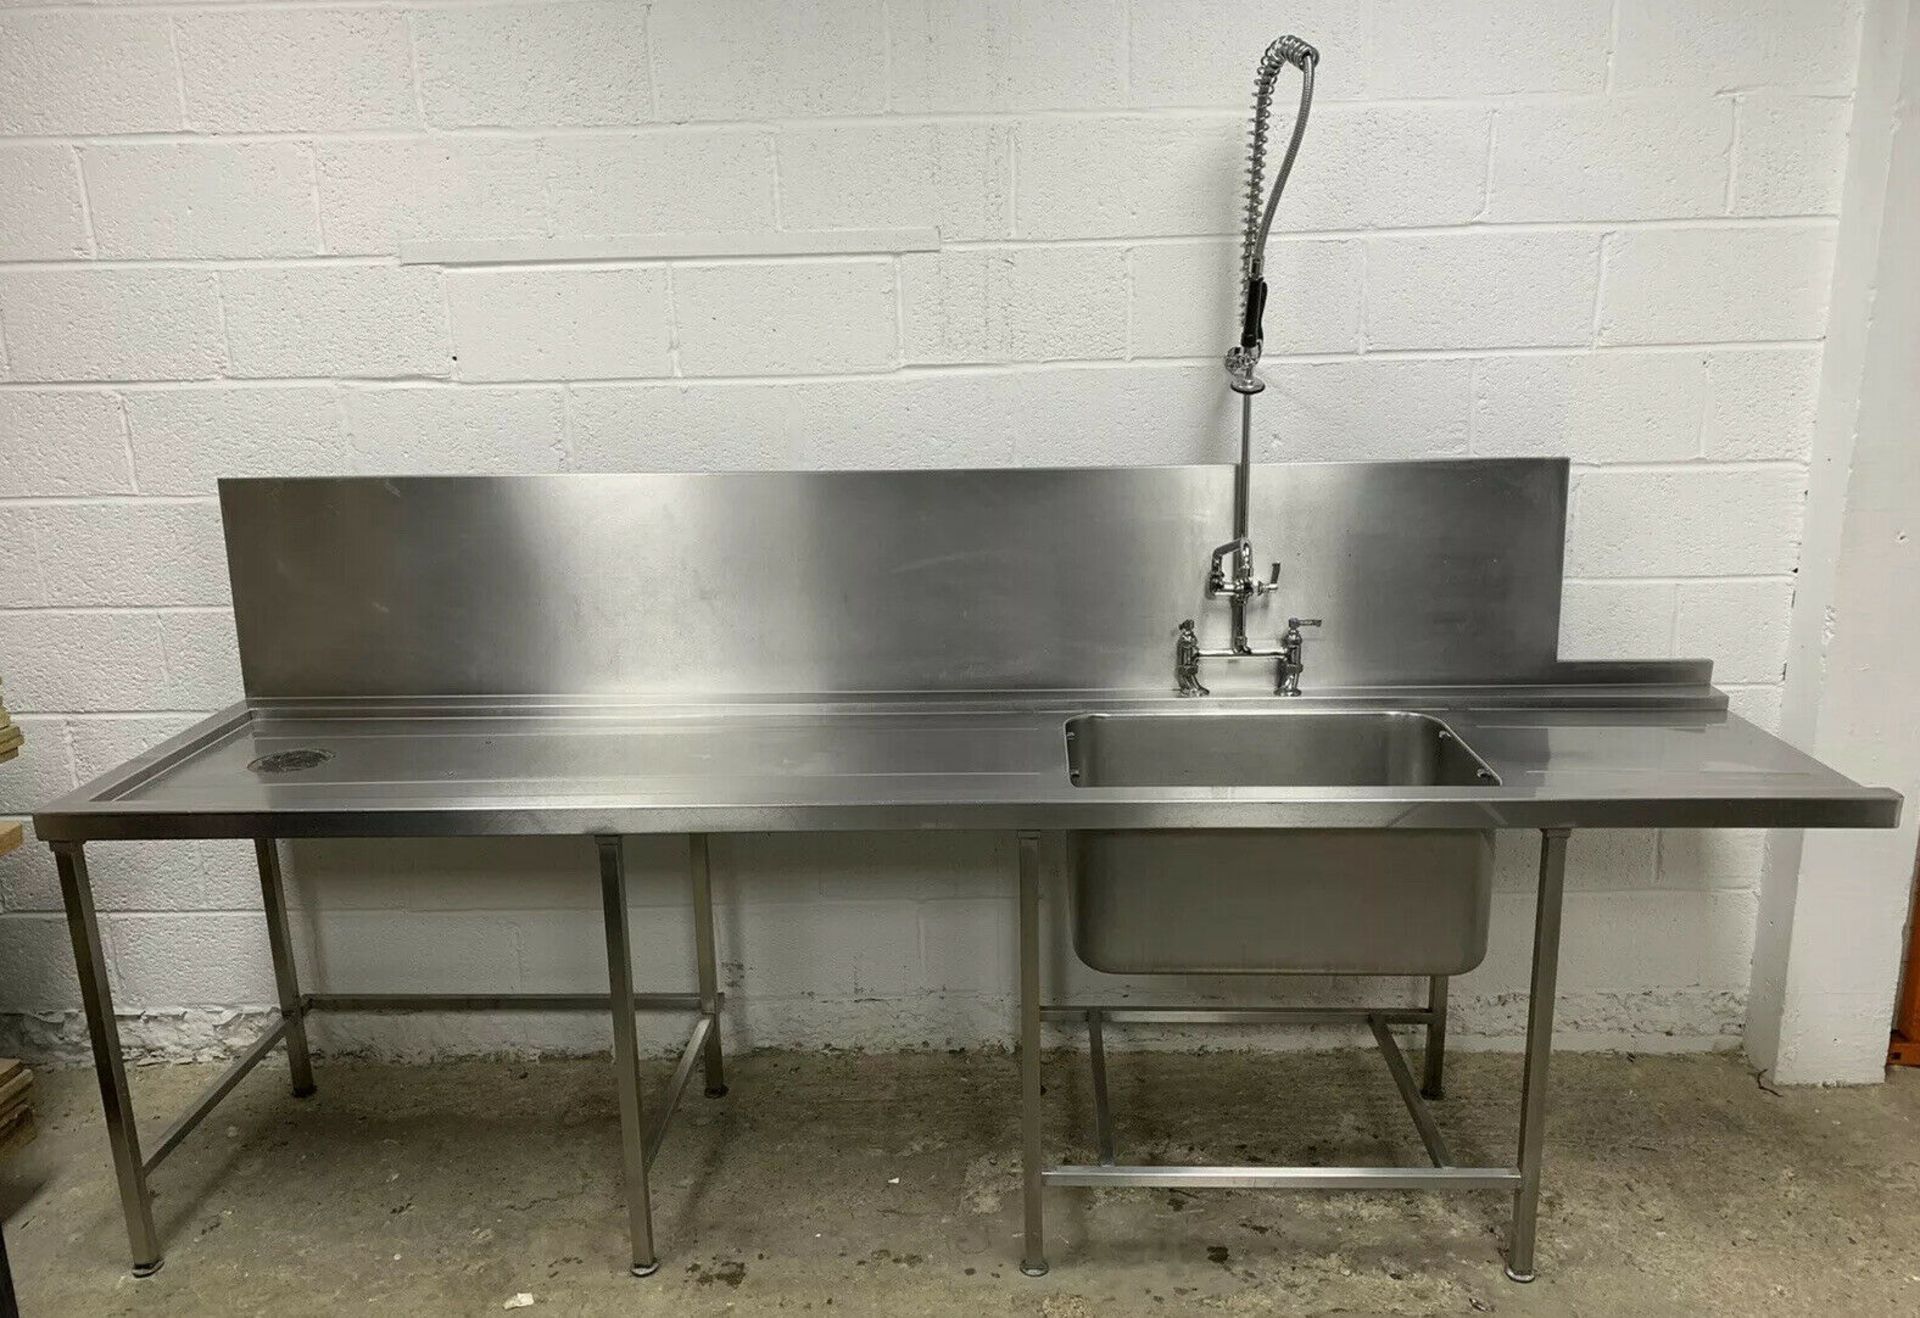 Stainless Steel Lefthand Dishwasher Entry / Inlet Sink With Reach Tap